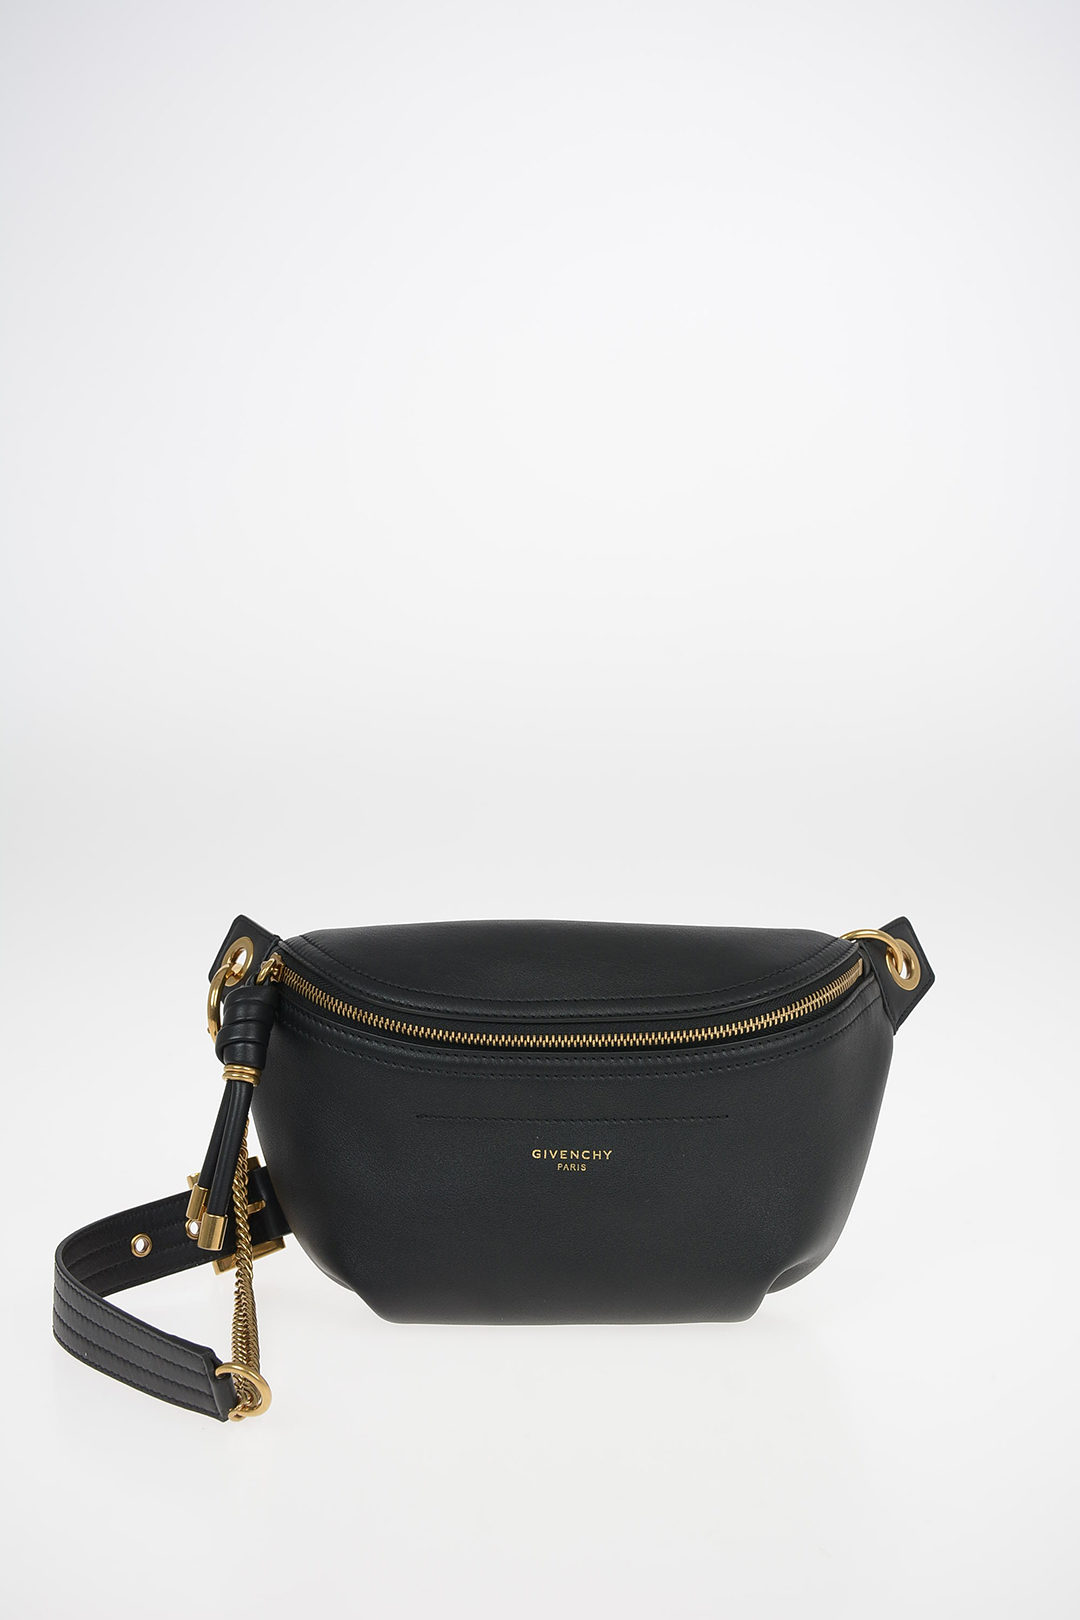 Givenchy Leather WHIP Bum Bag women - Glamood Outlet